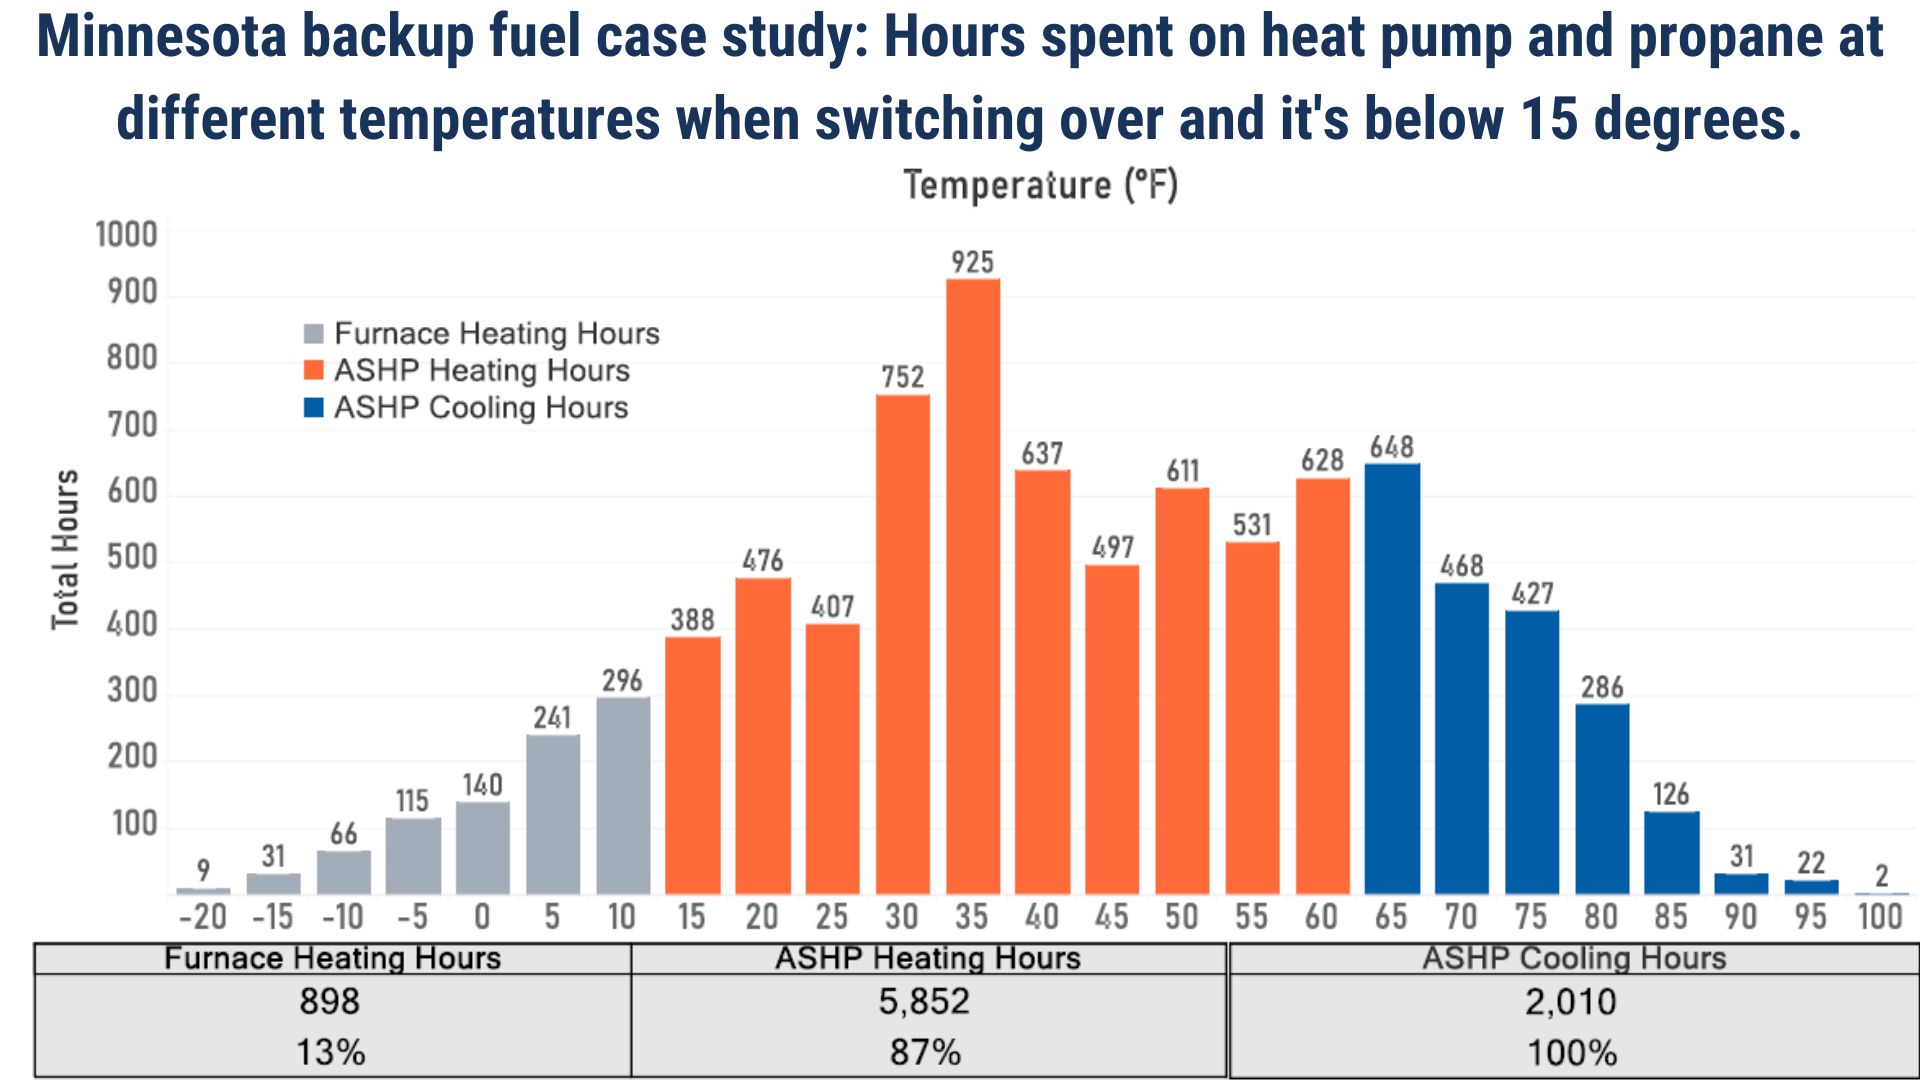 The title of this chart is "Minnesota backup fuel case study: Hours spent on heat pump and propane at different temperatures when switching over and it's below 15 degrees." 